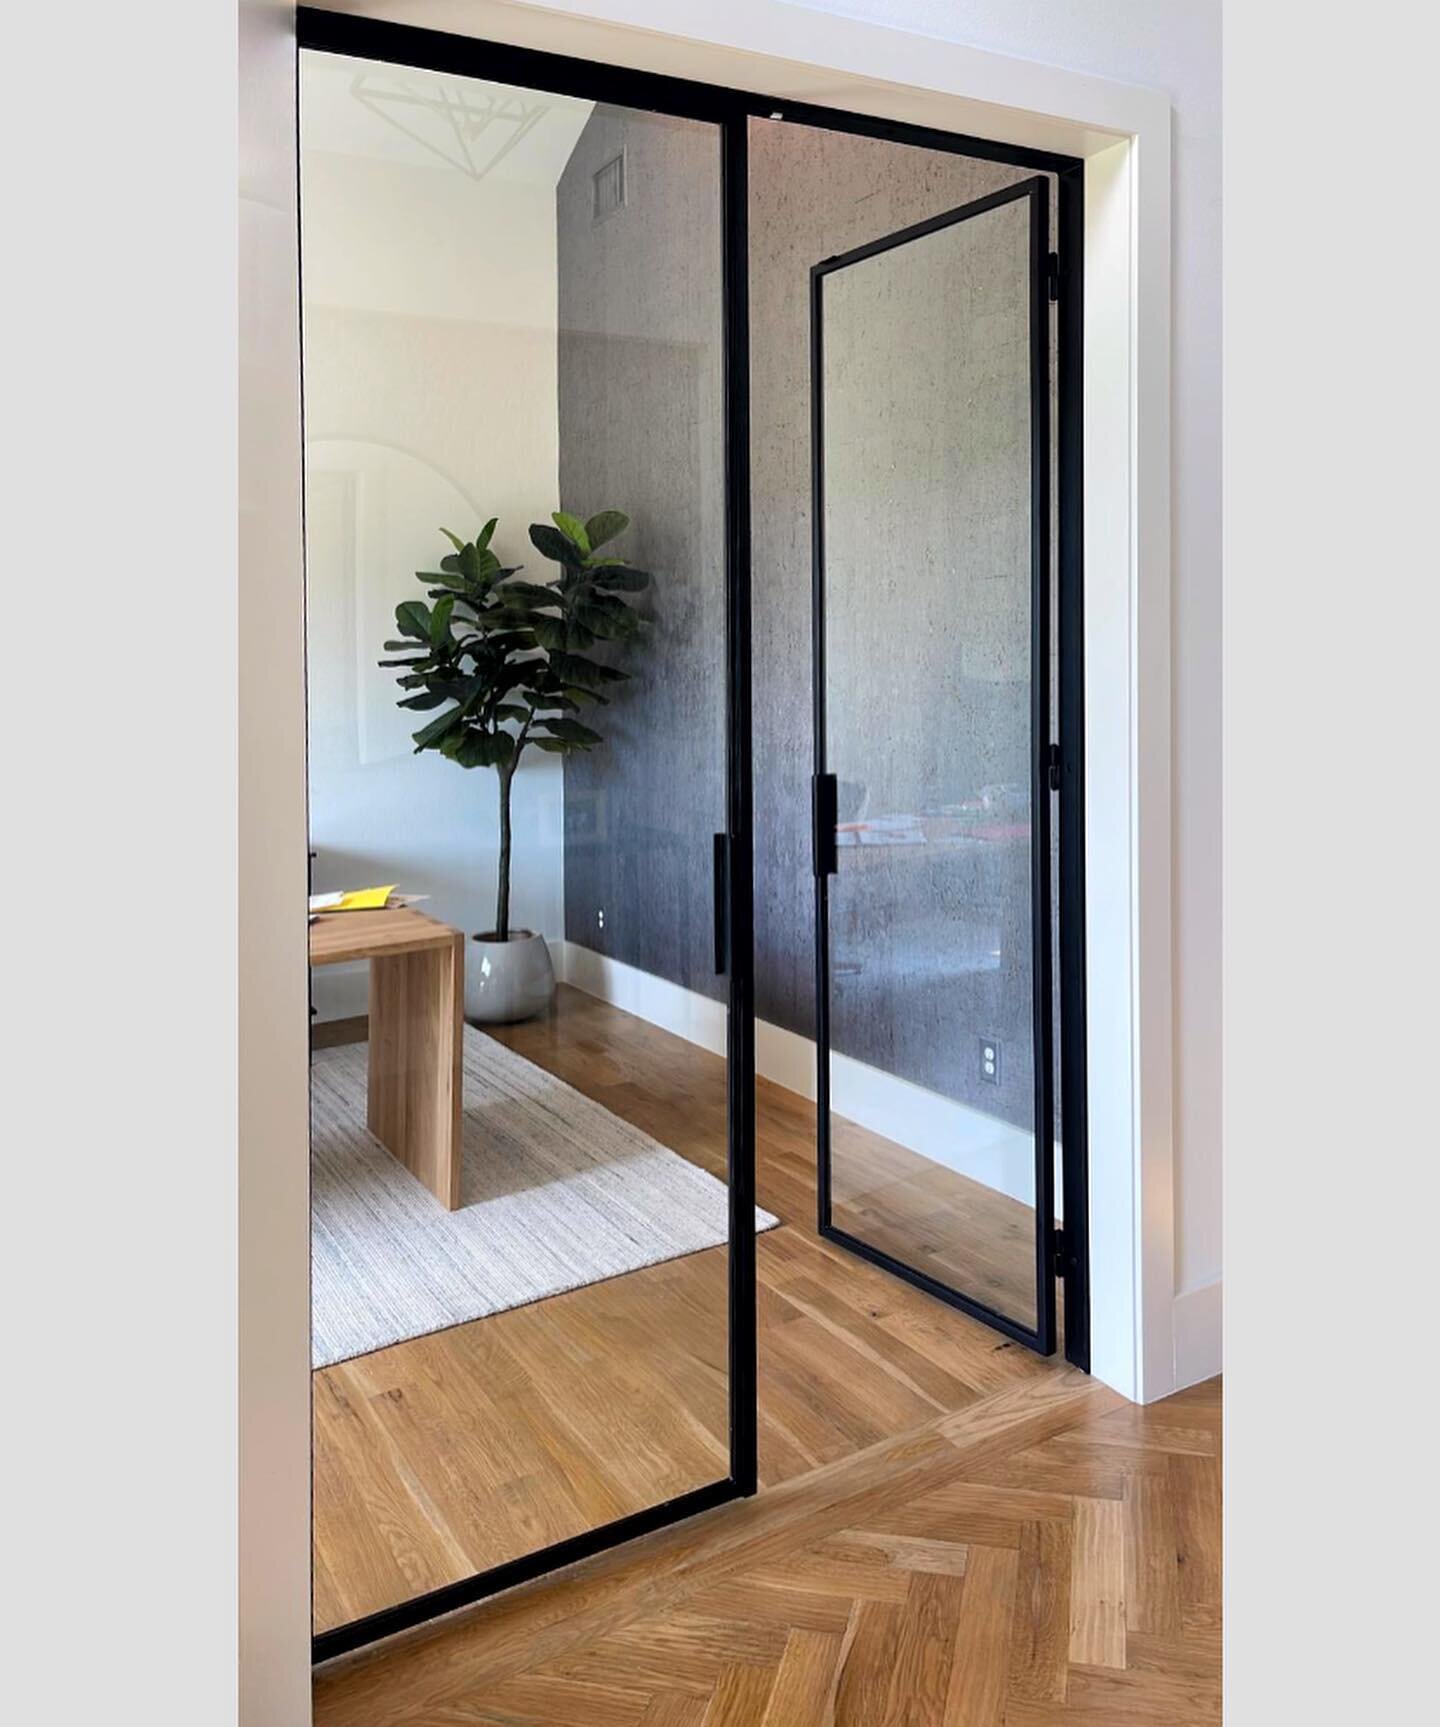 Meet the SSS door 🔥 stands for Super Sleek &amp; Sexy 🔥 This style gives any interior space a nice architectural accent but still feels very light ✨

#steeldoors #officedoor #officepartition #homebuilder #irondoors #moderndoors #modernhomes #custom